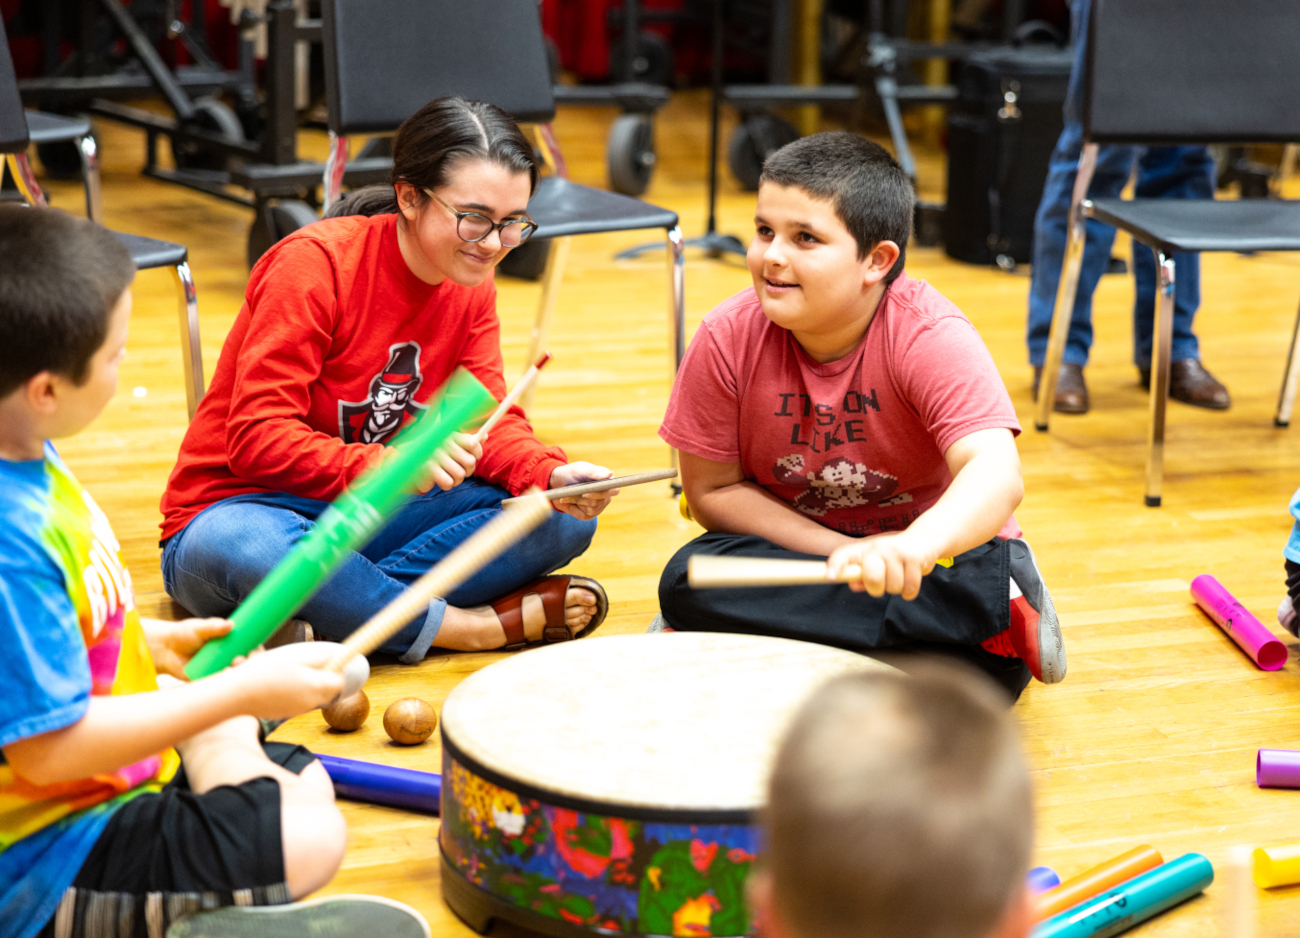 An APSU student sits on the ground and plays drums with several children.